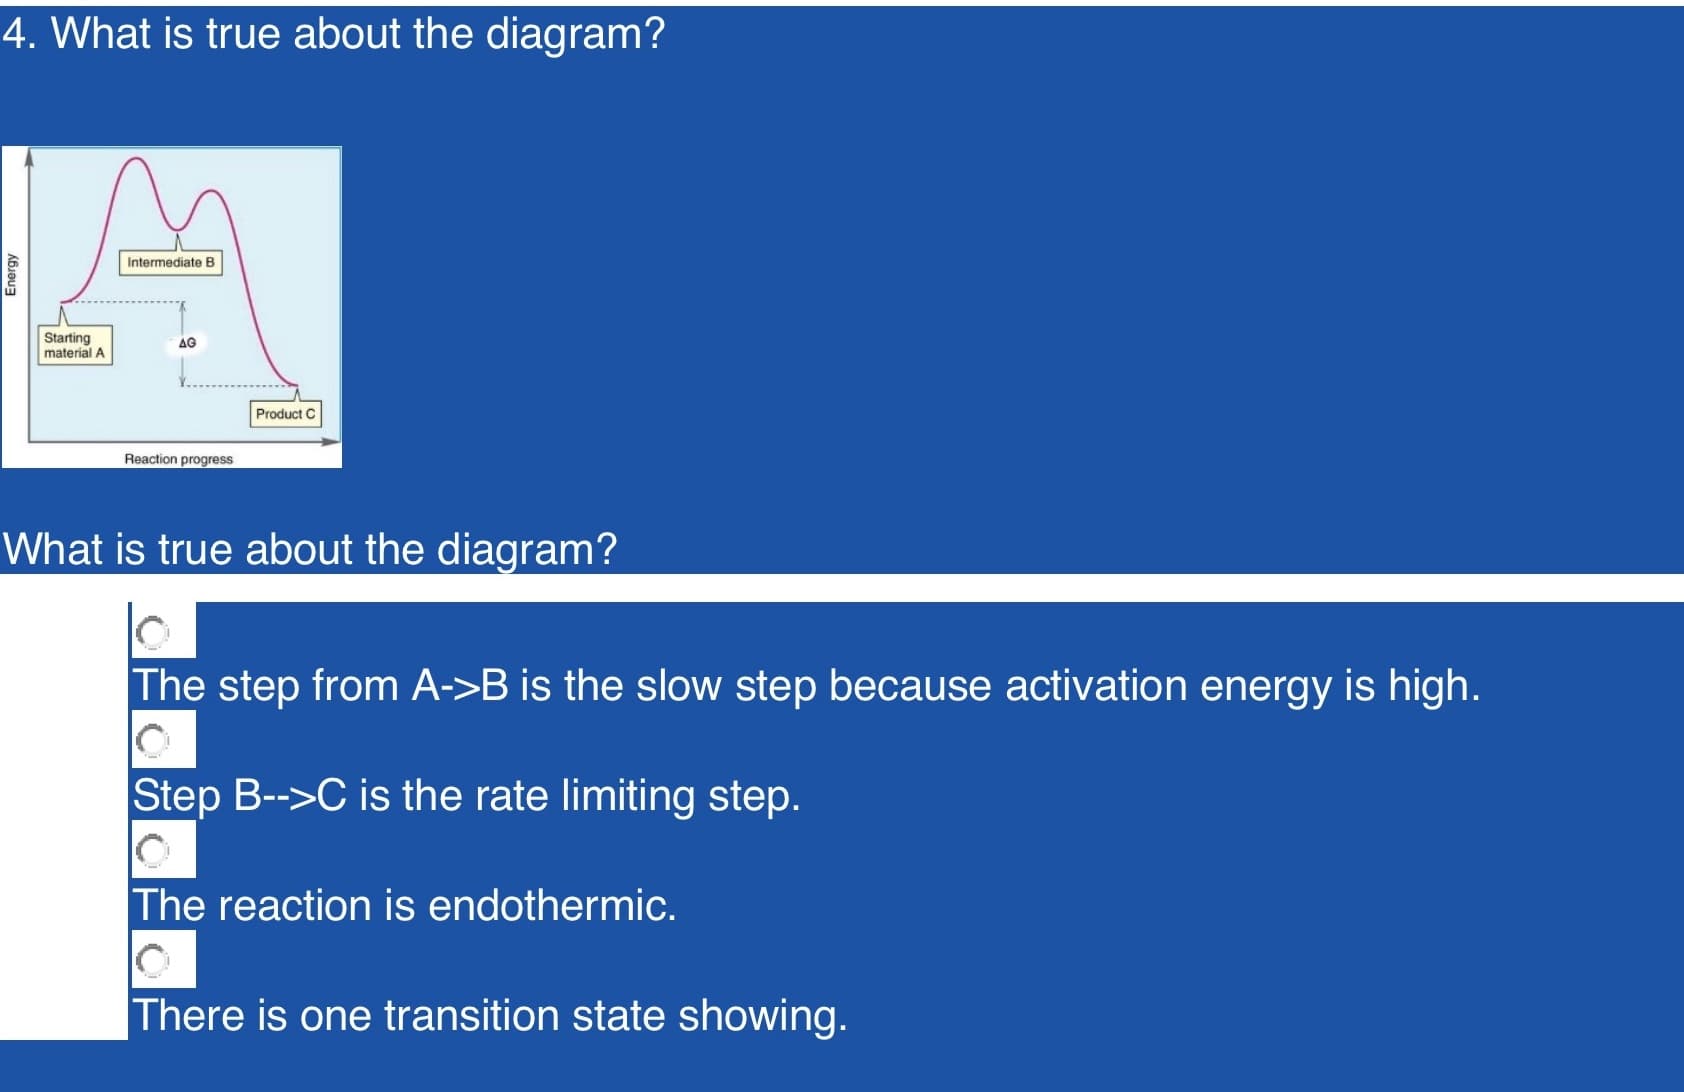 4. What is true about the diagram?
Intermediate B
Starting
material A
AG
Product C
Reaction progress
What is true about the diagram?
The step from A->B is the slow step because activation energy is high.
Step B-->C is the rate limiting step.
The reaction is endothermic.
There is one transition state showing.
Energy
